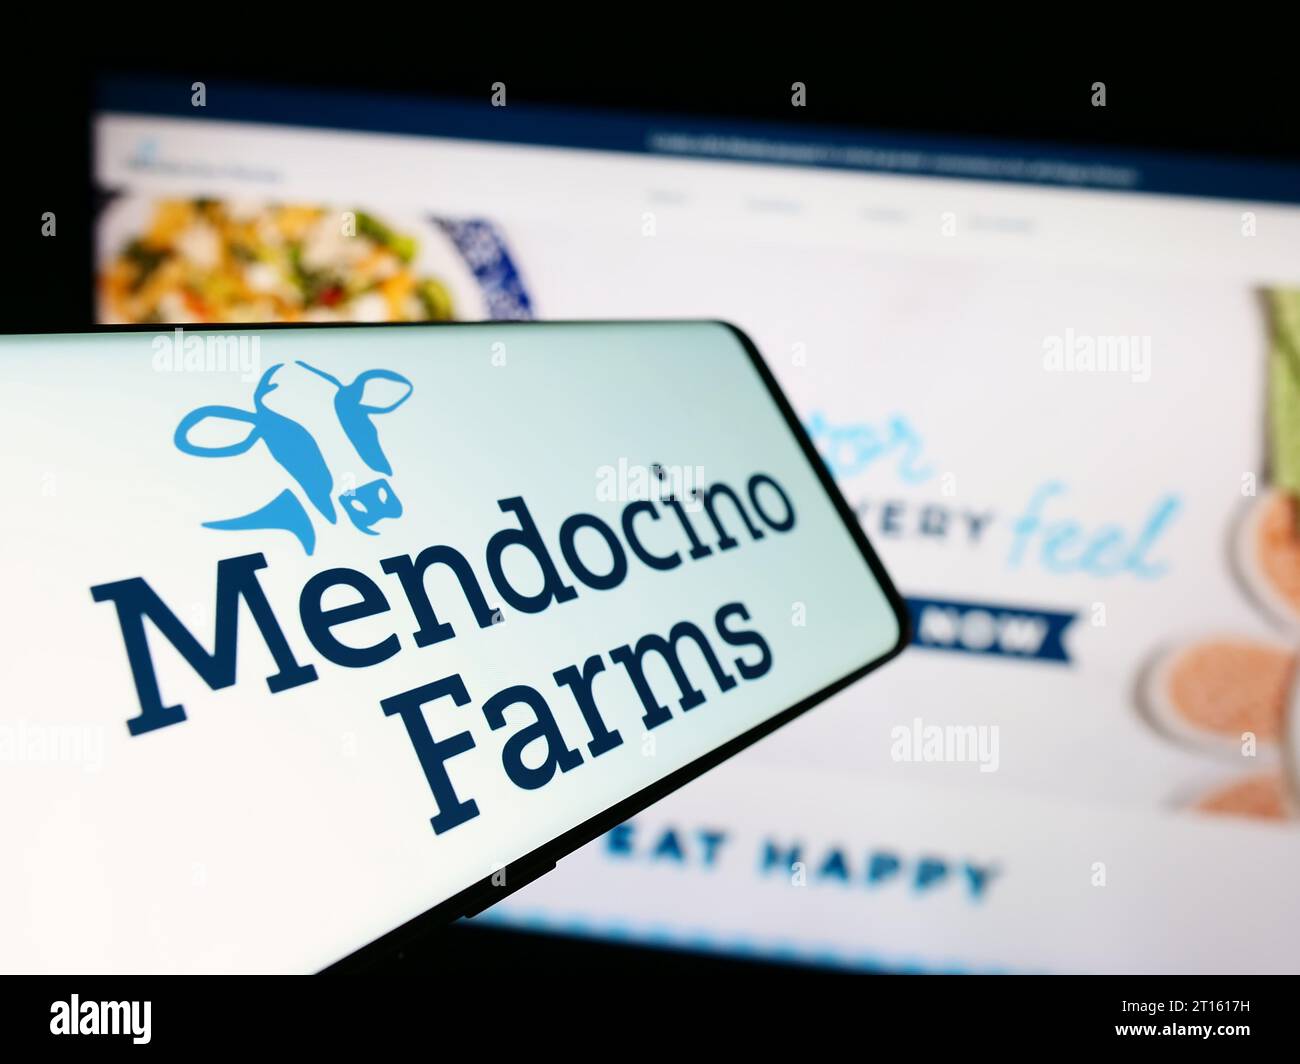 Cellphone with logo of American fast casual restaurant chain Mendocino Farms in front of company website. Focus on center-left of phone display. Stock Photo